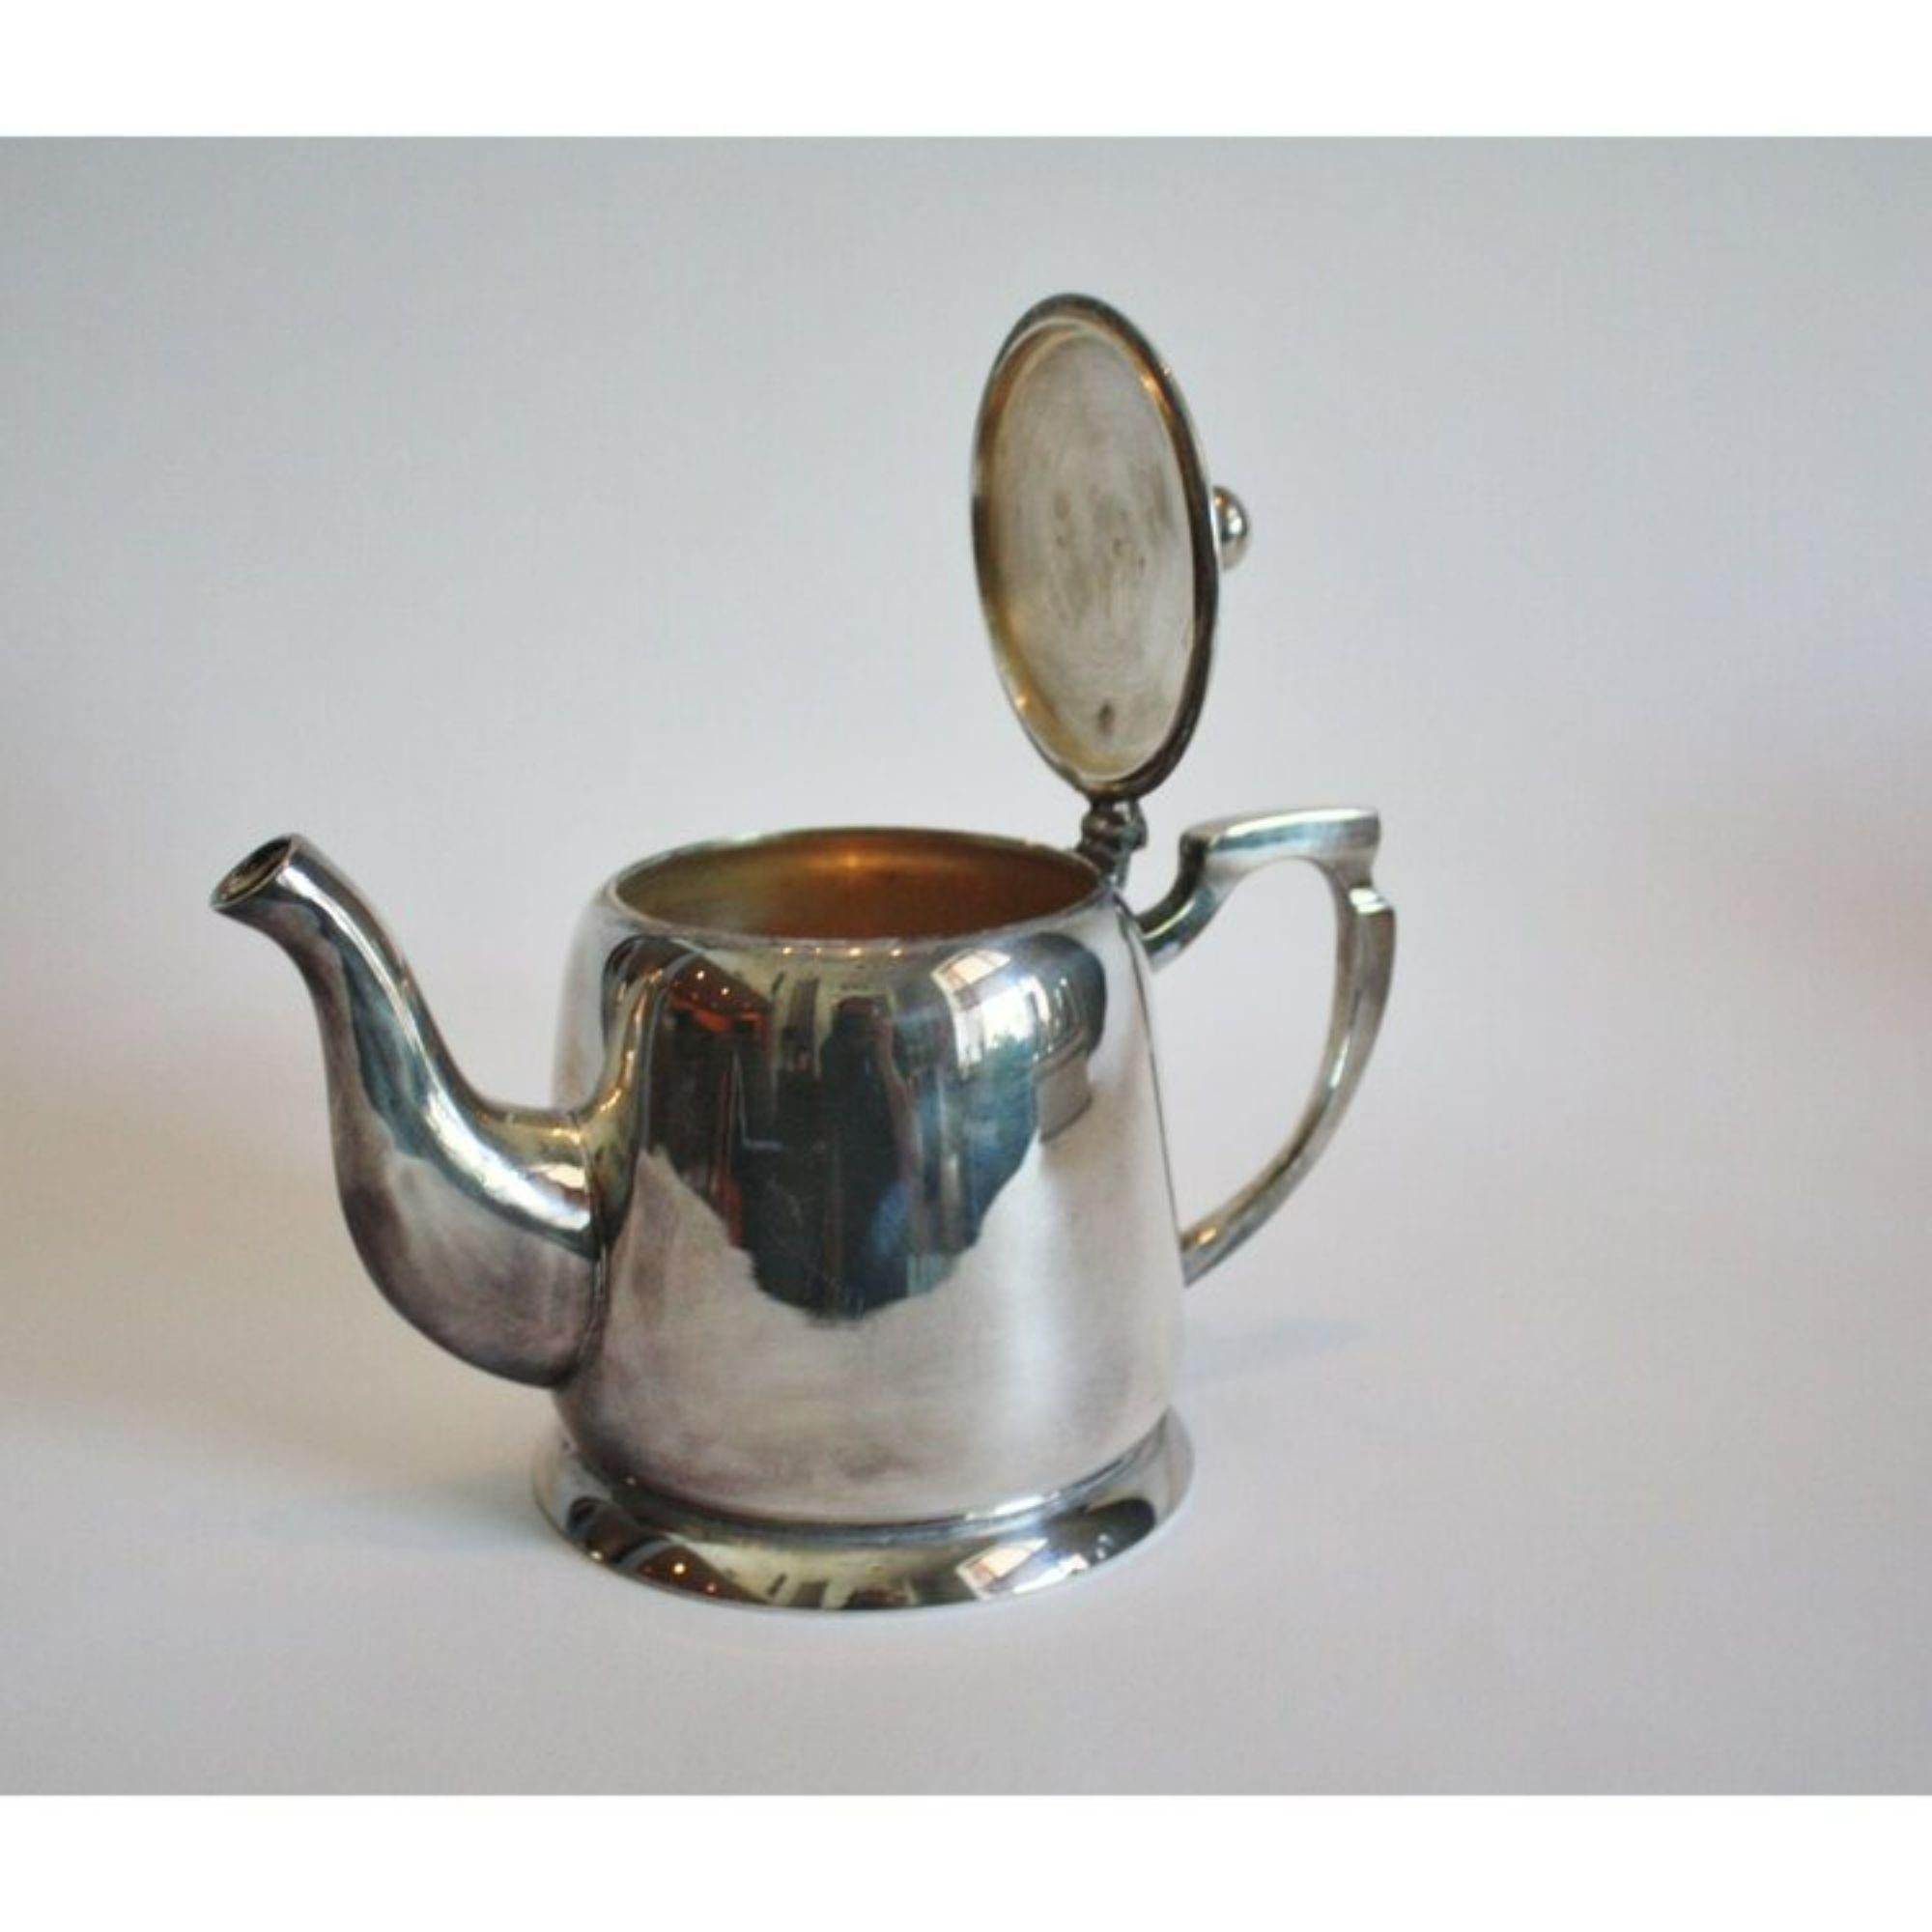 6 piece silver-plated tea and coffee service includes coffee pitcher 6